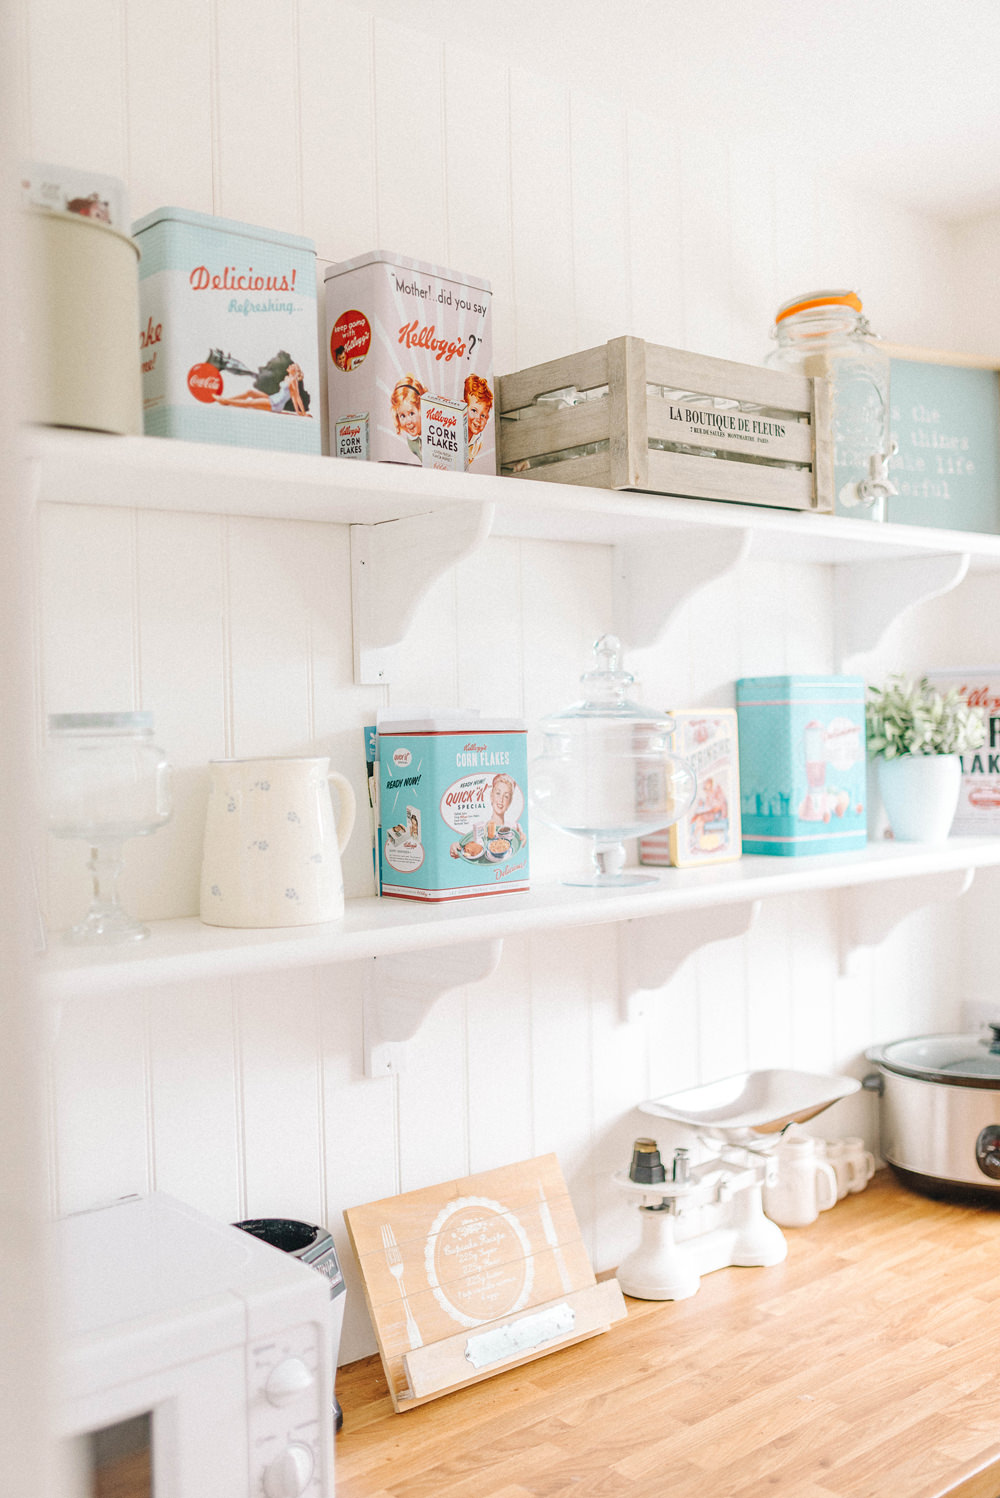 Open shelving in retro style kitchen